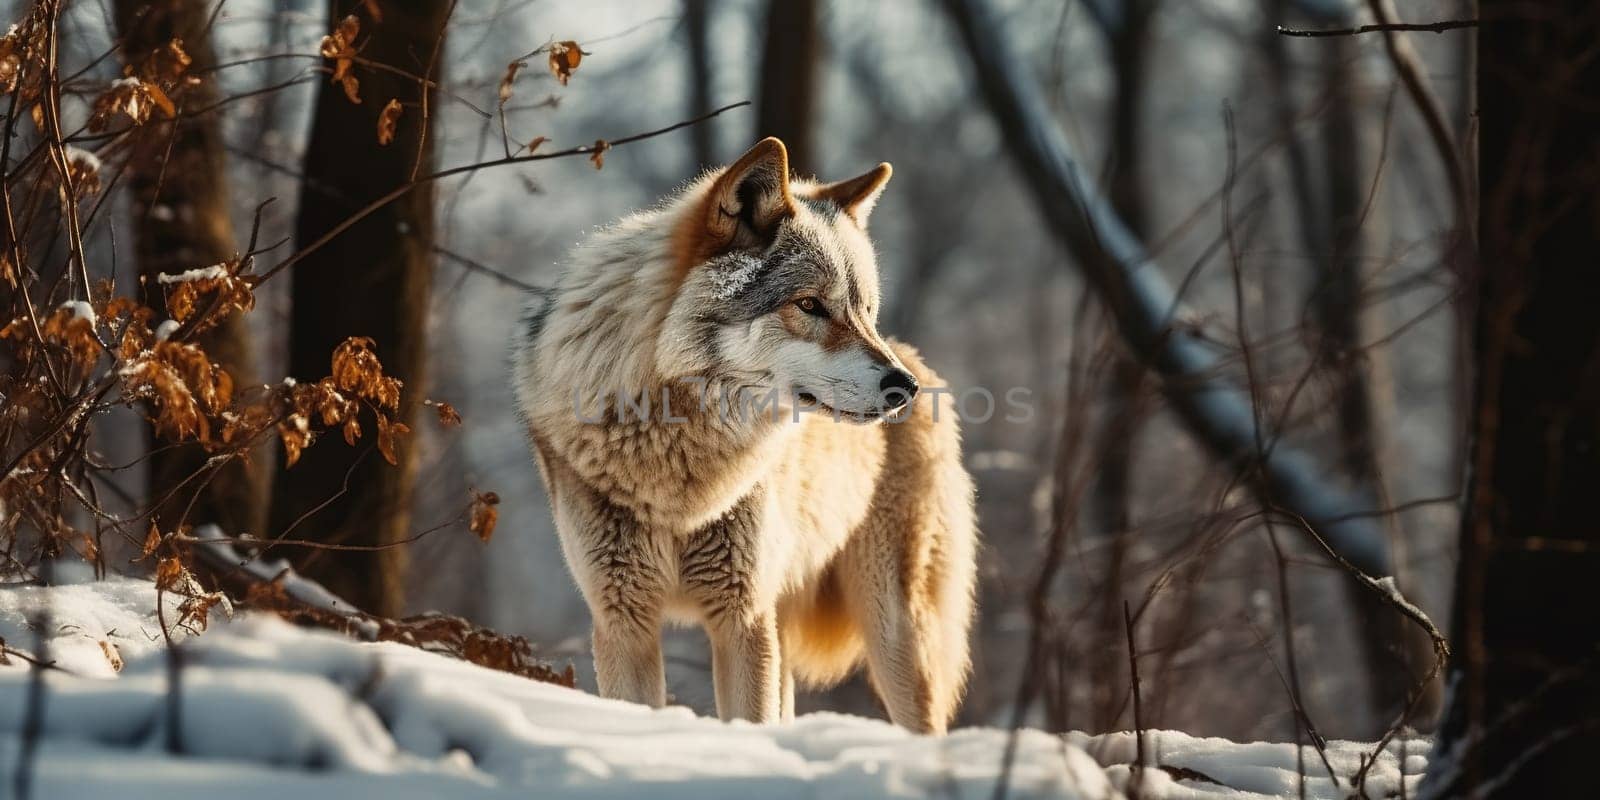 Big Wild Wolf Hunting In The Forest In Winter by tan4ikk1